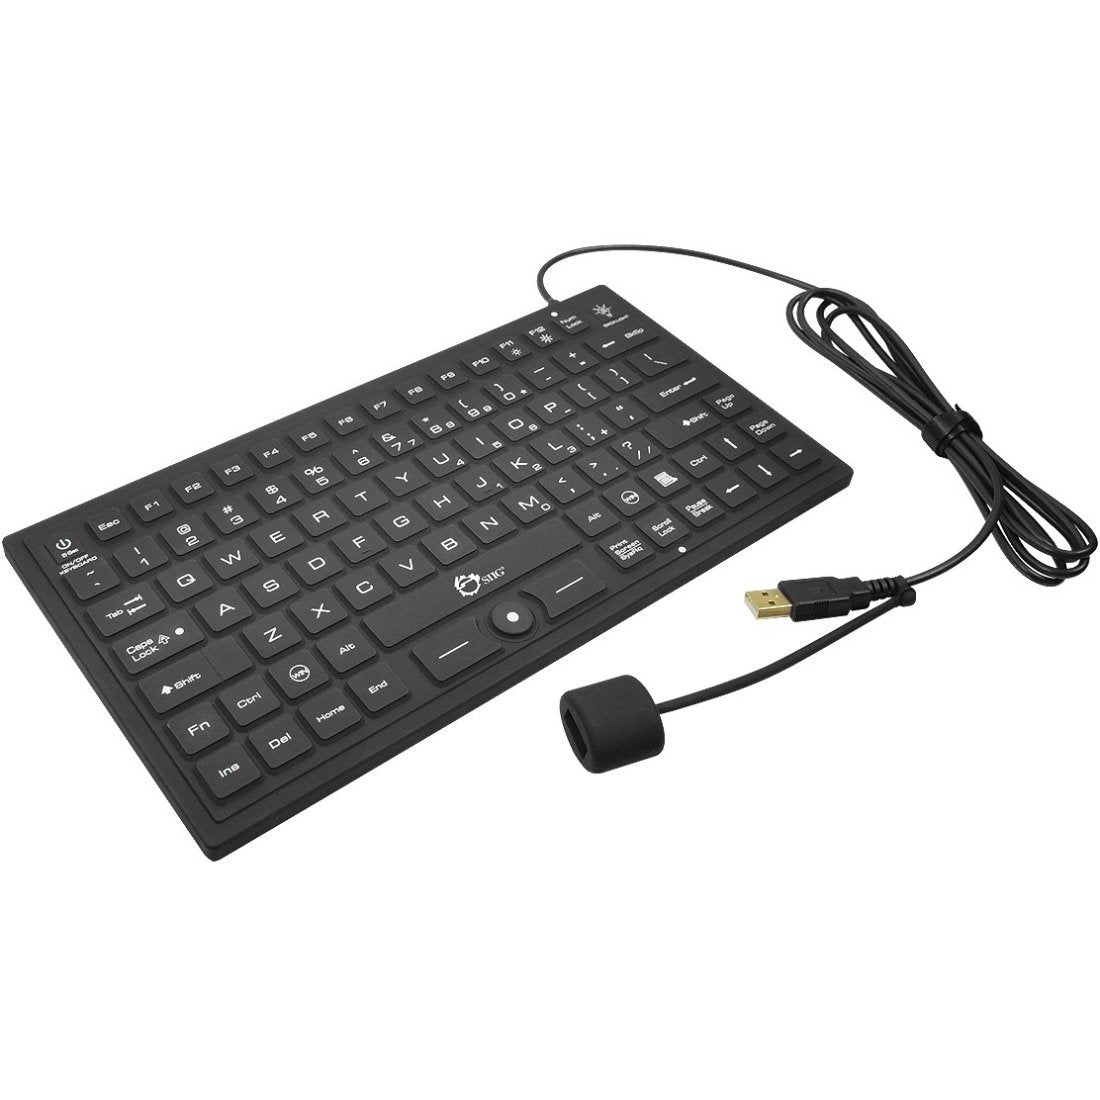 SIIG Industrial-Medical Grade Washable Backlit Keyboard with Pointing Device